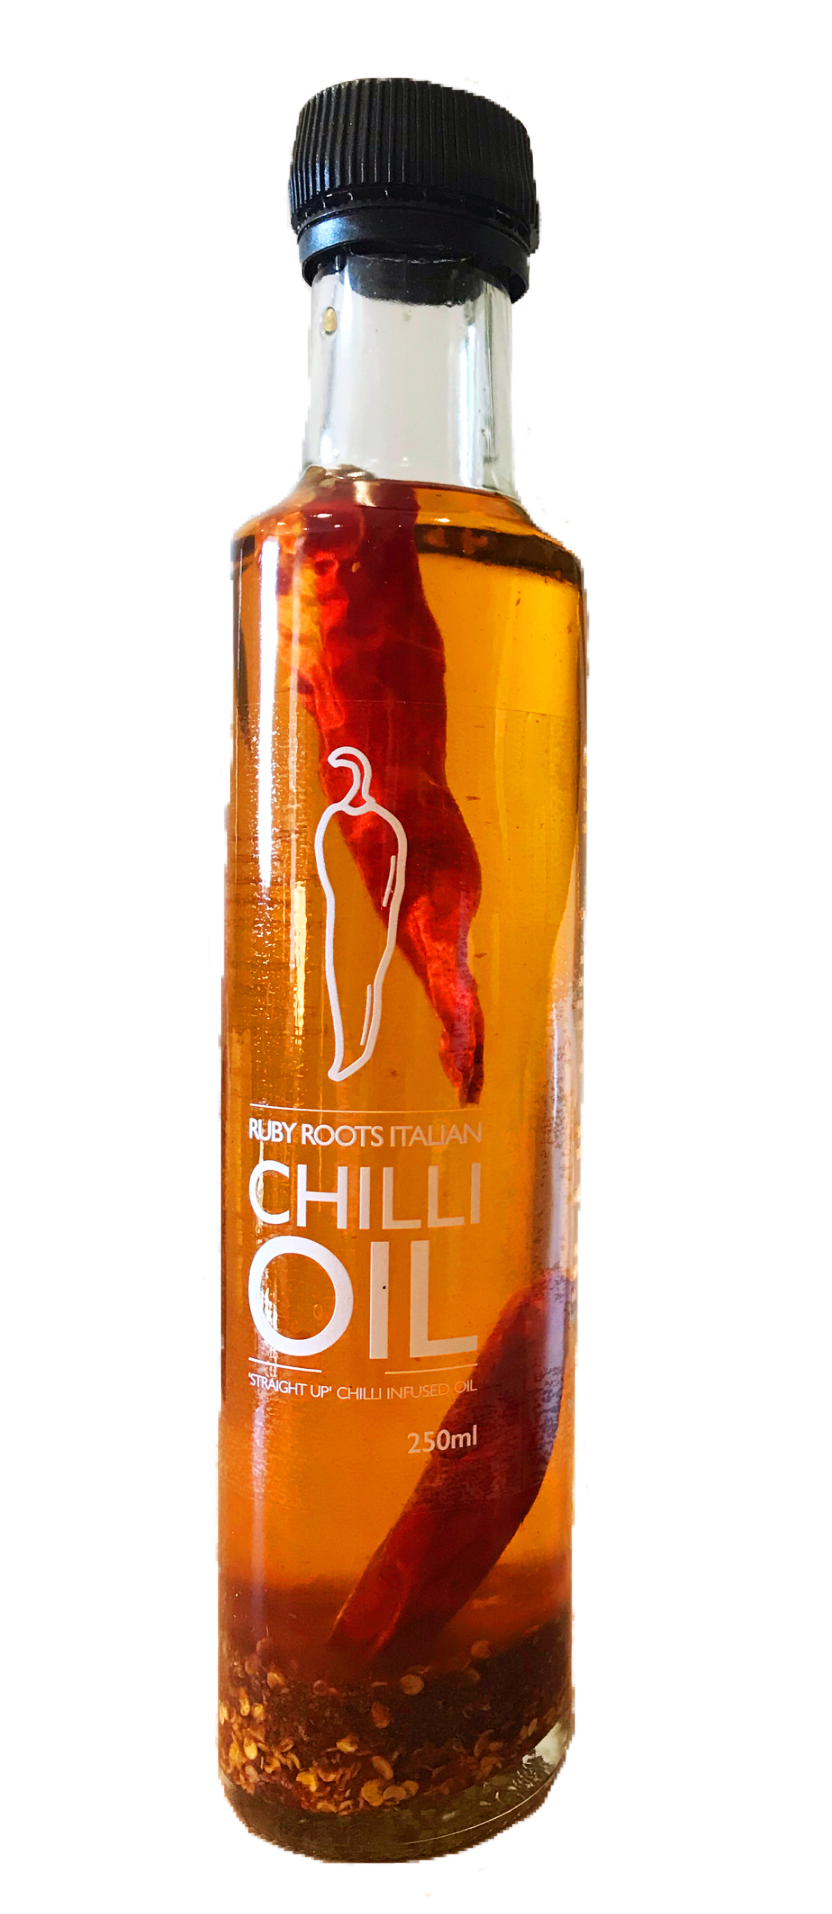 Ruby Roots Chilli Oil